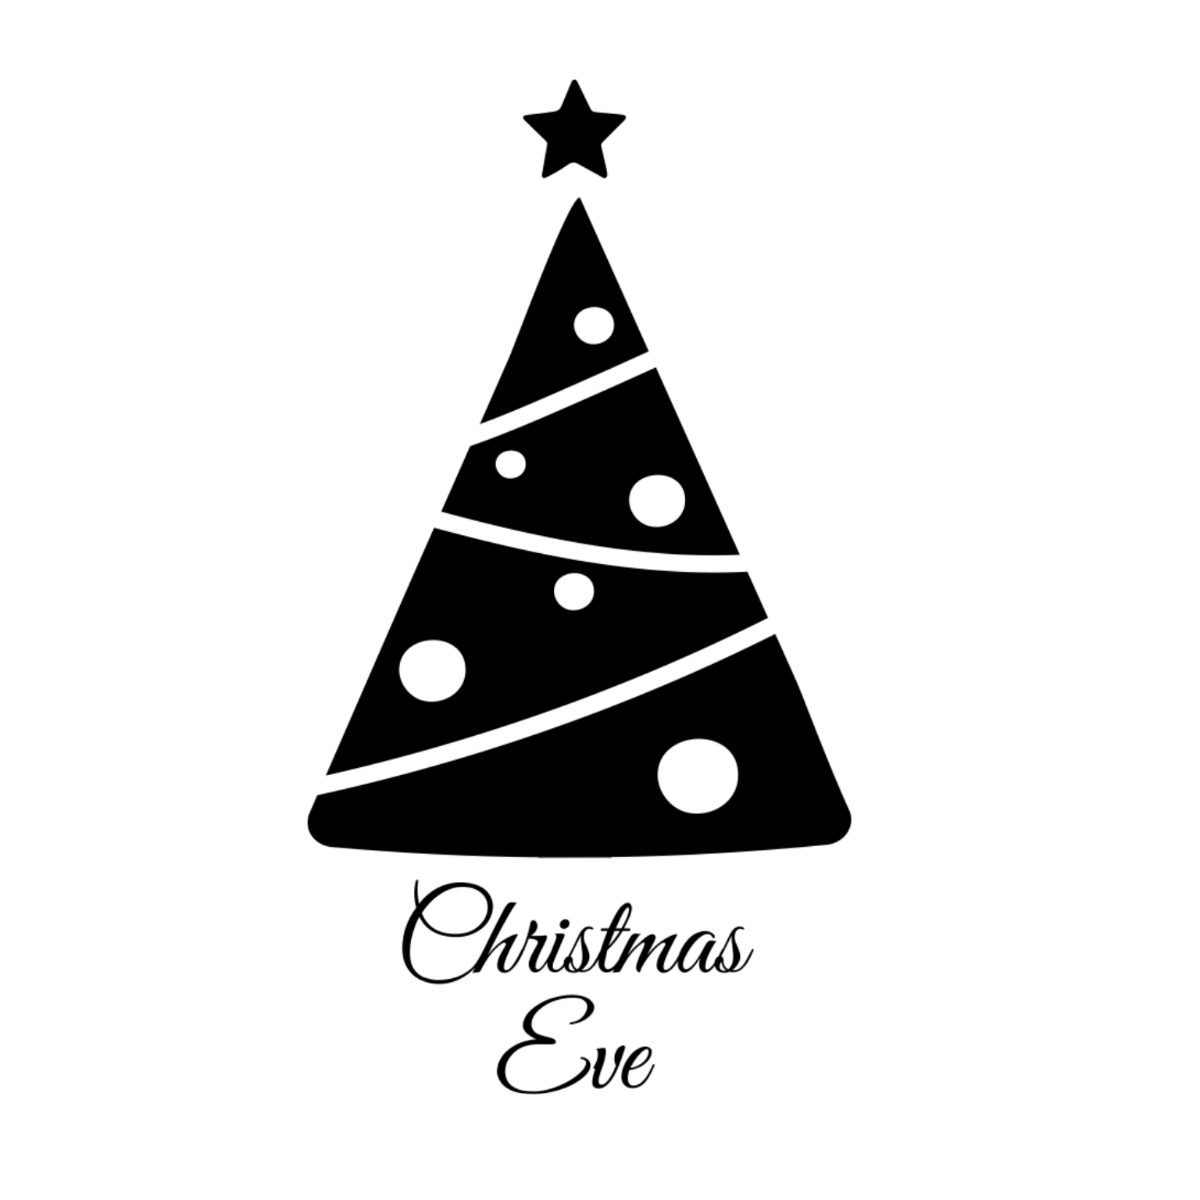 Free Christmas Eve Clipart Black and White Template